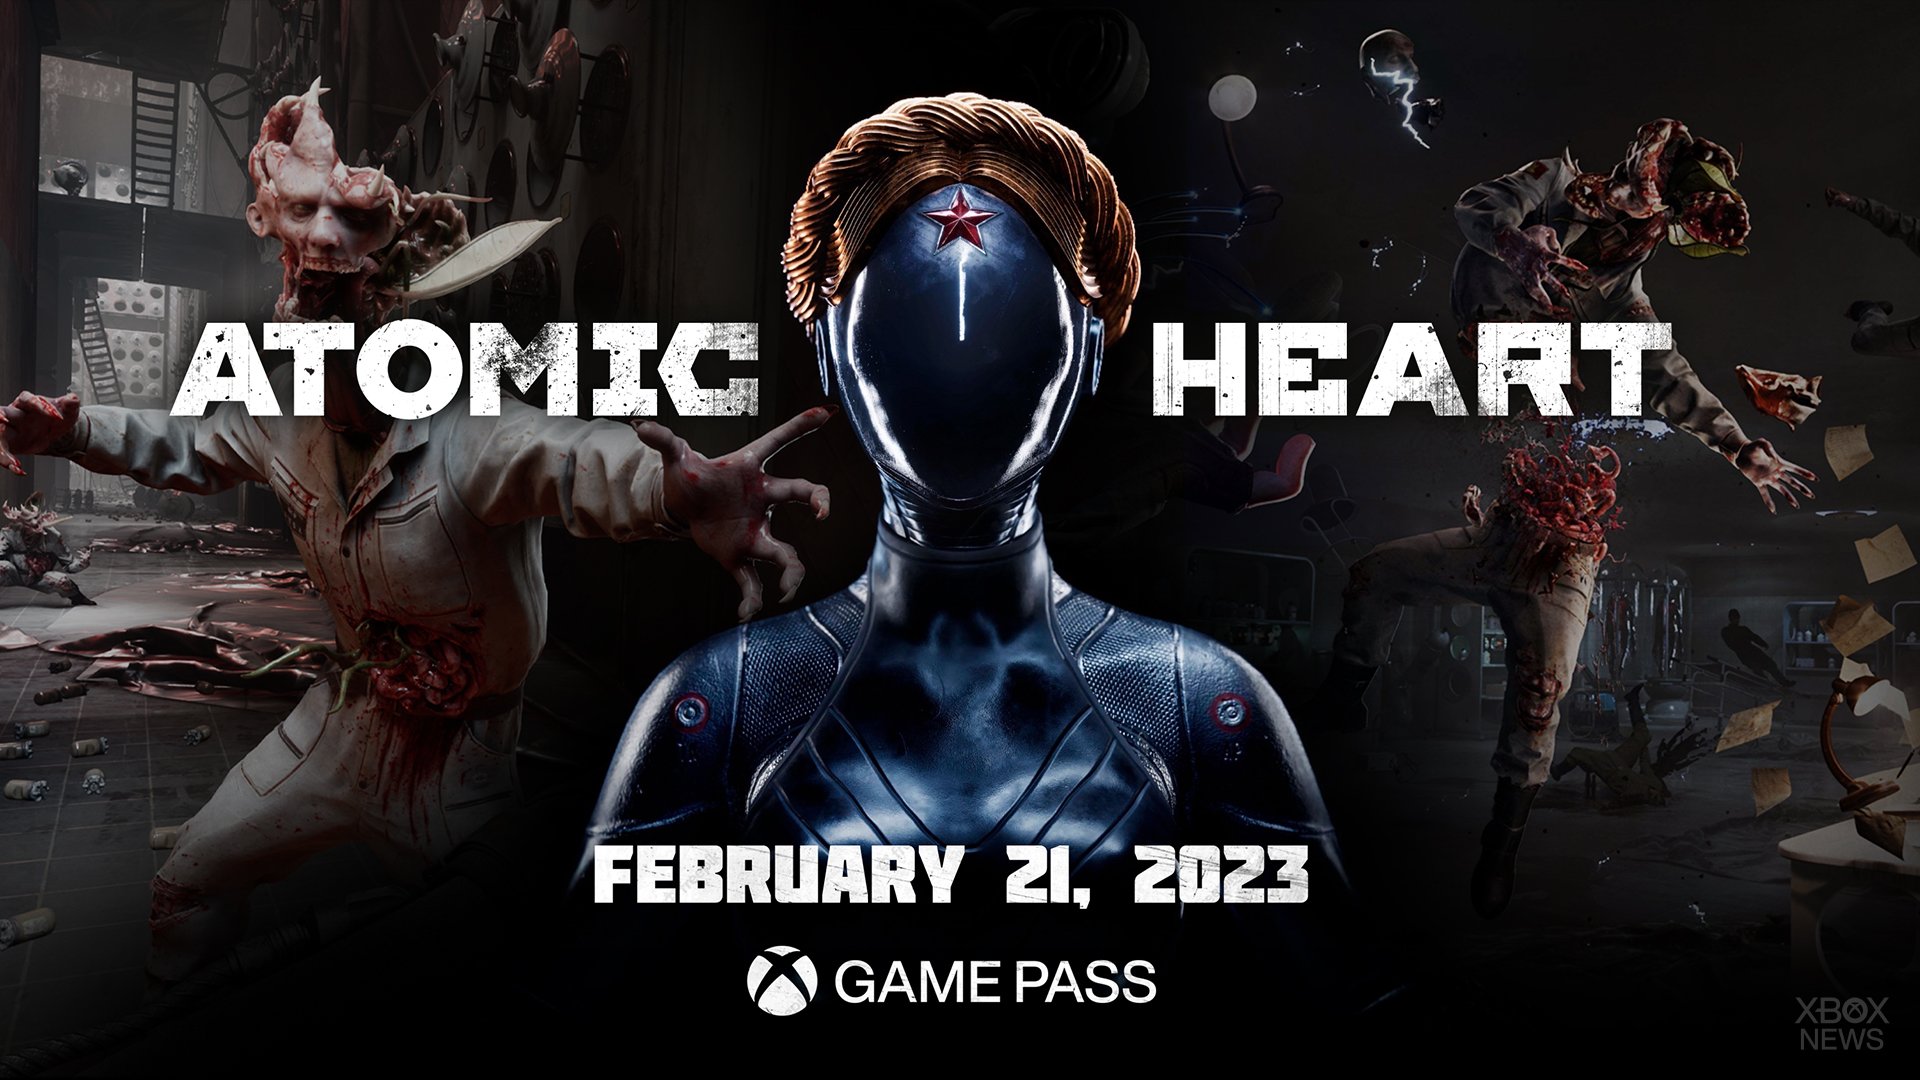 Atomic Heart release date set for February 21st